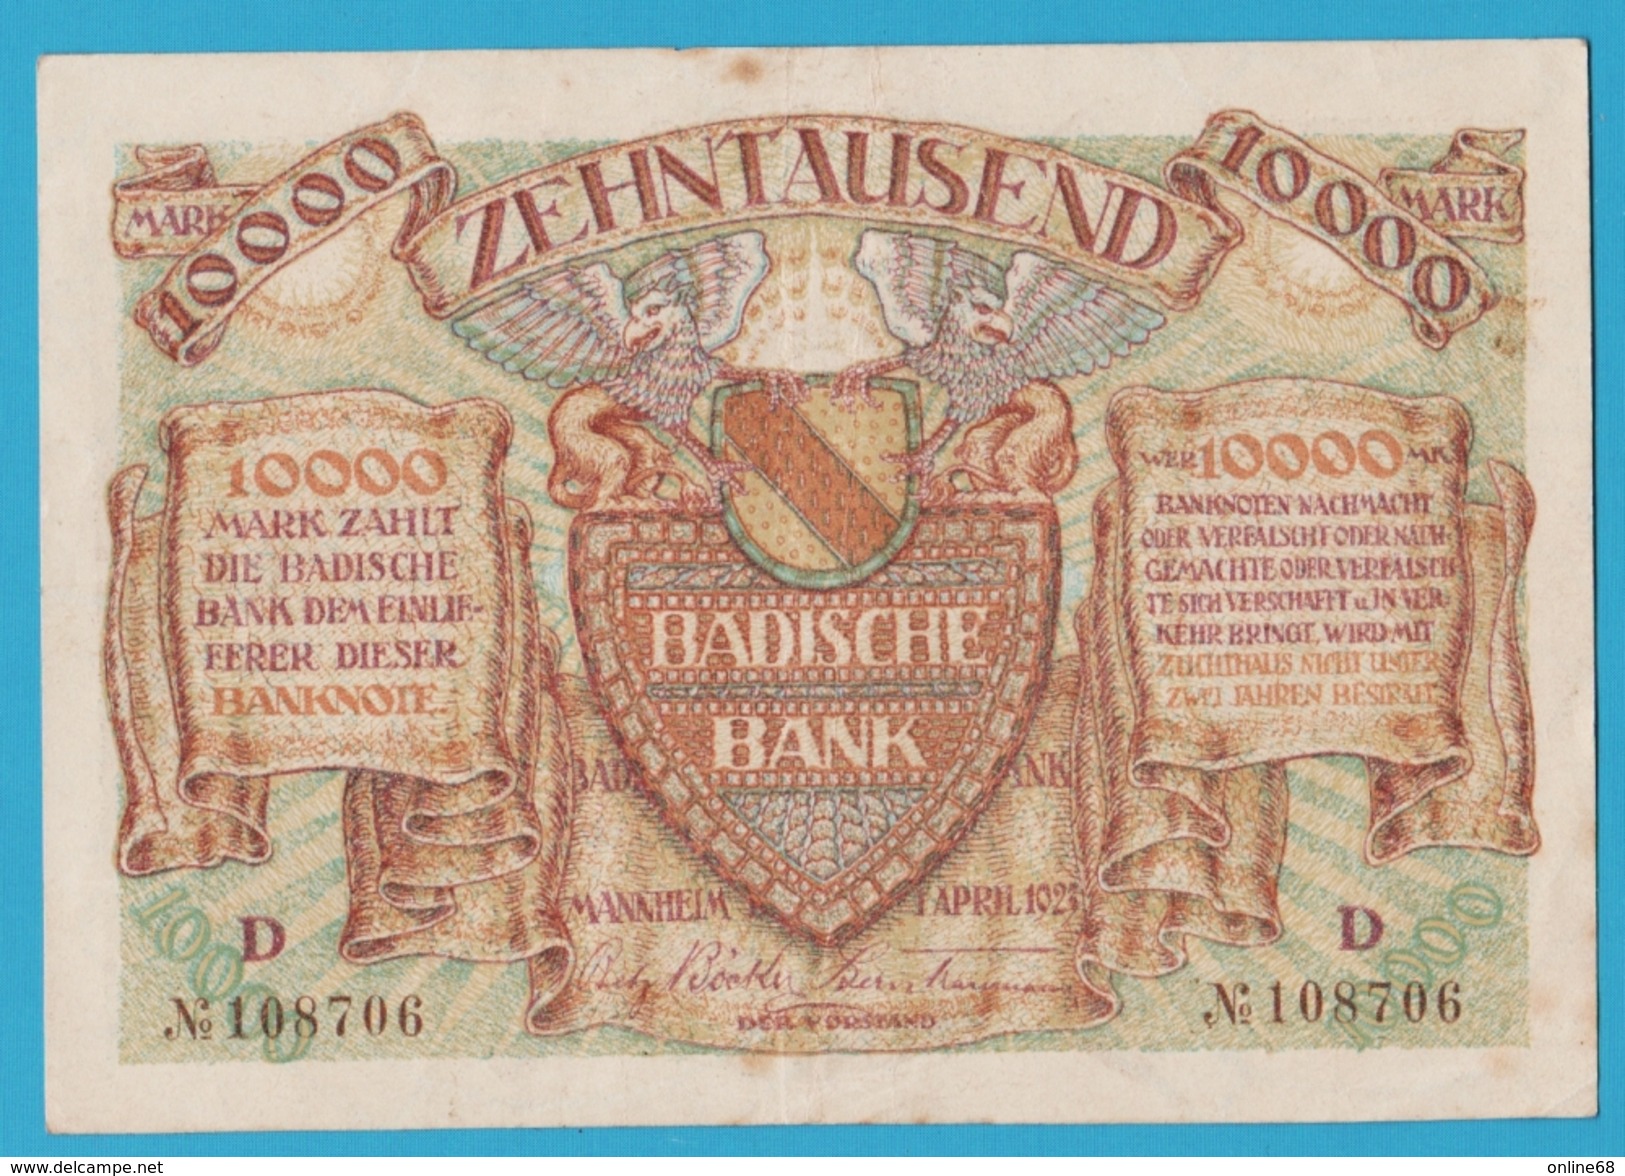 GERMANY BADEN BADISCHE BANK 10.000 Mark 01.04.1923 Serie D No 108706 P# 910 - [11] Local Banknote Issues